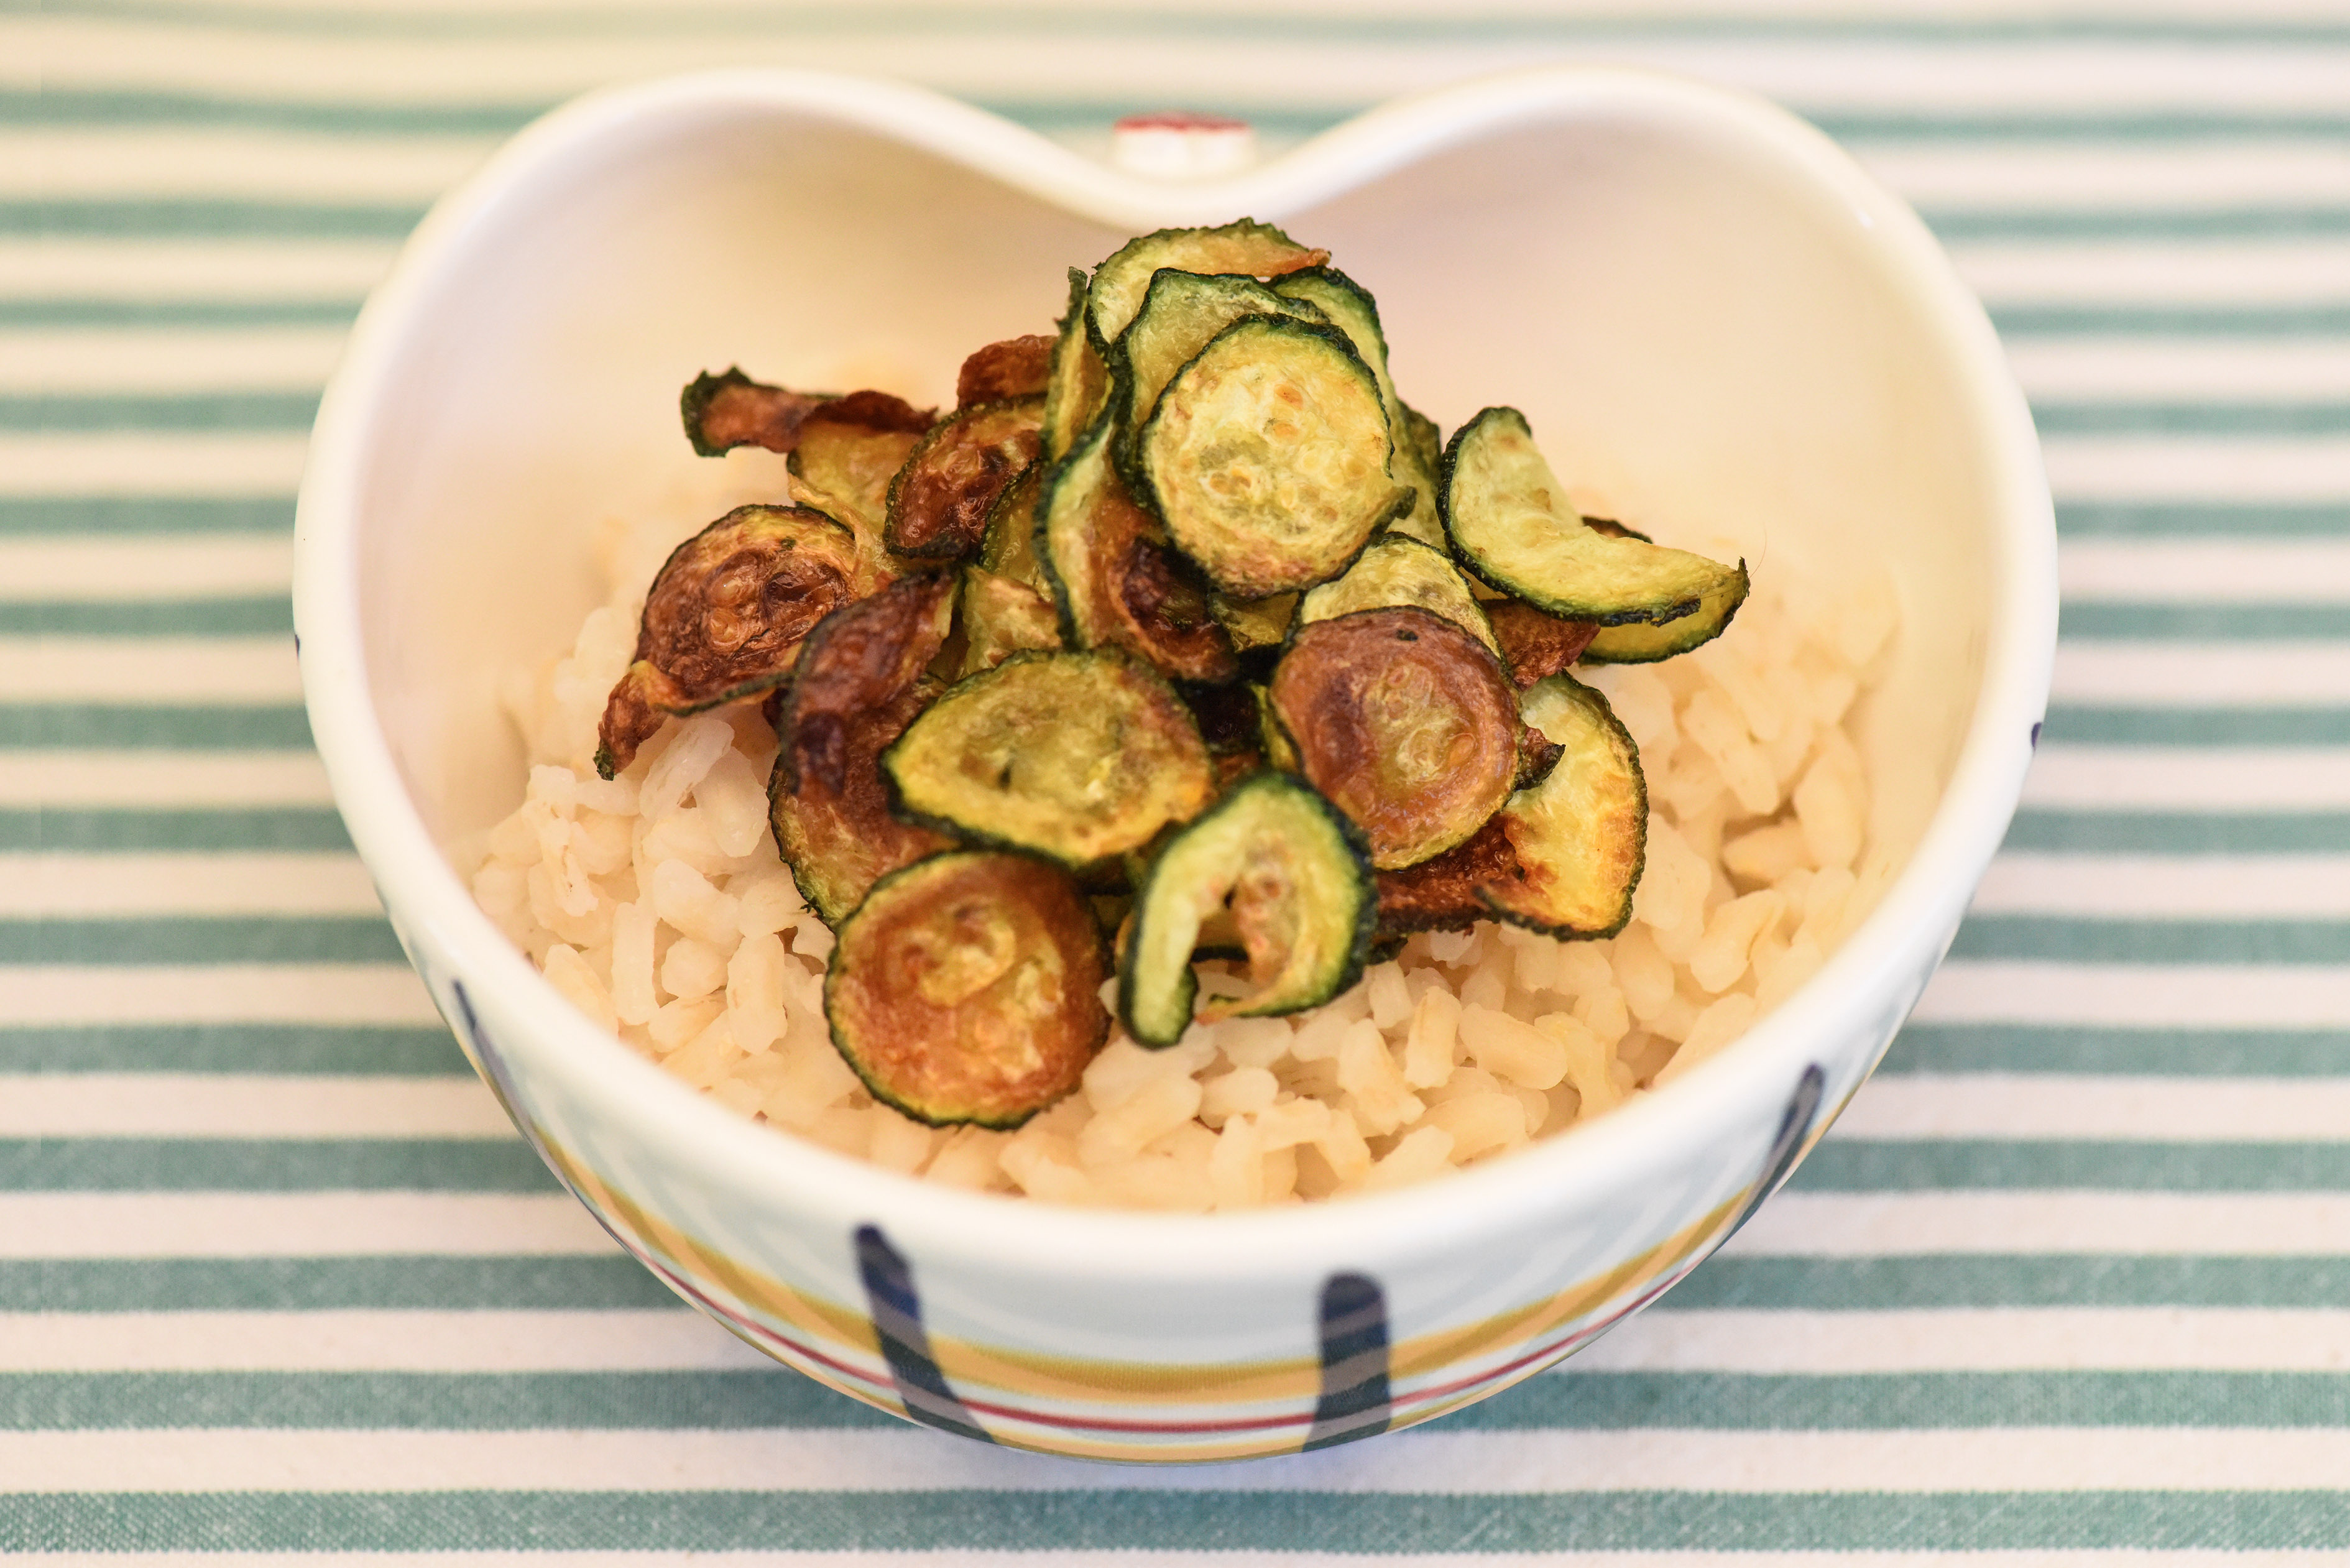 50% Unpolished Carnaroli rice with fried courgettes